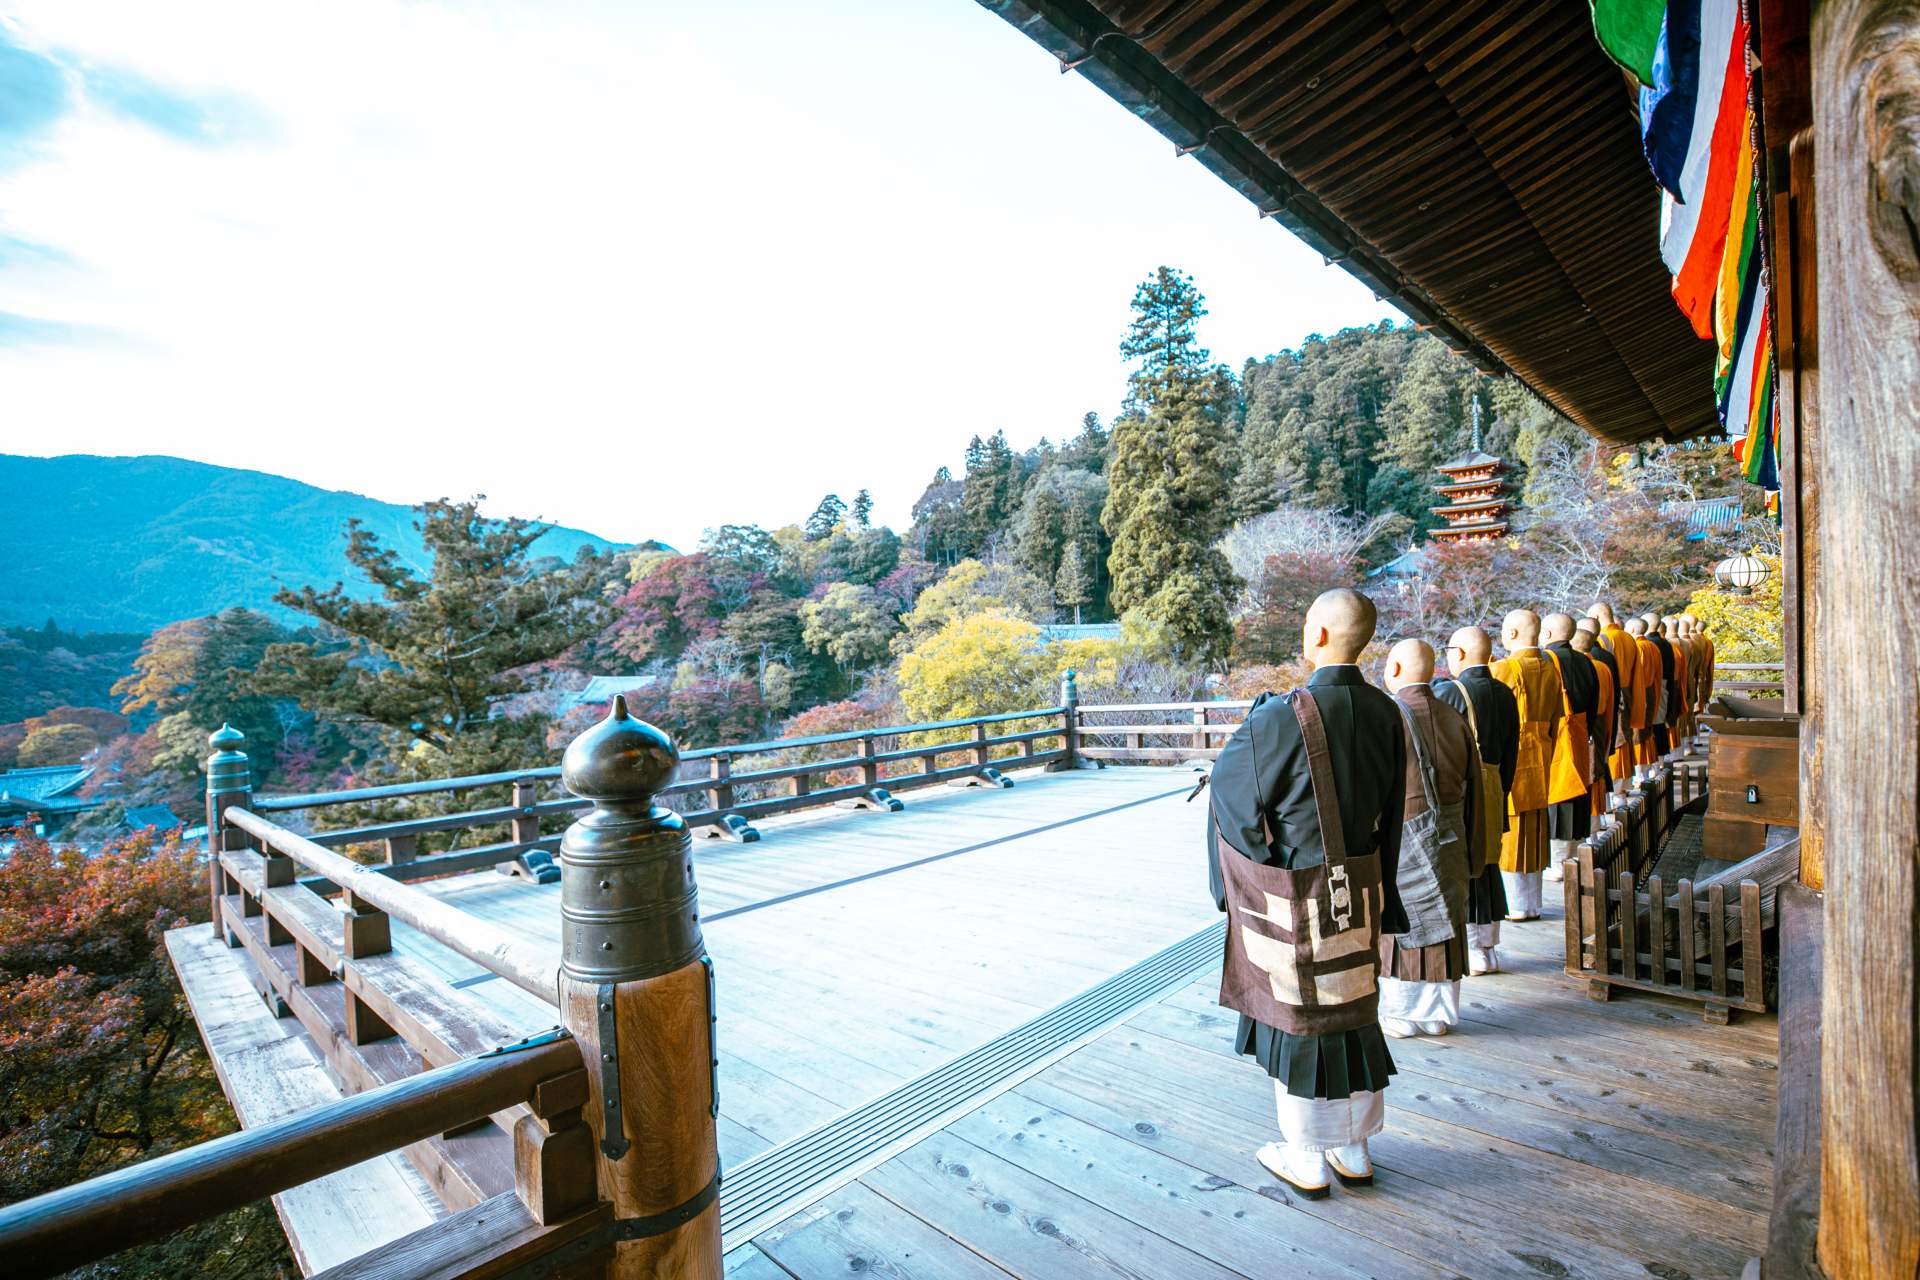  Hasedera Temple has been performing this ritual daily for over 1,000 years.